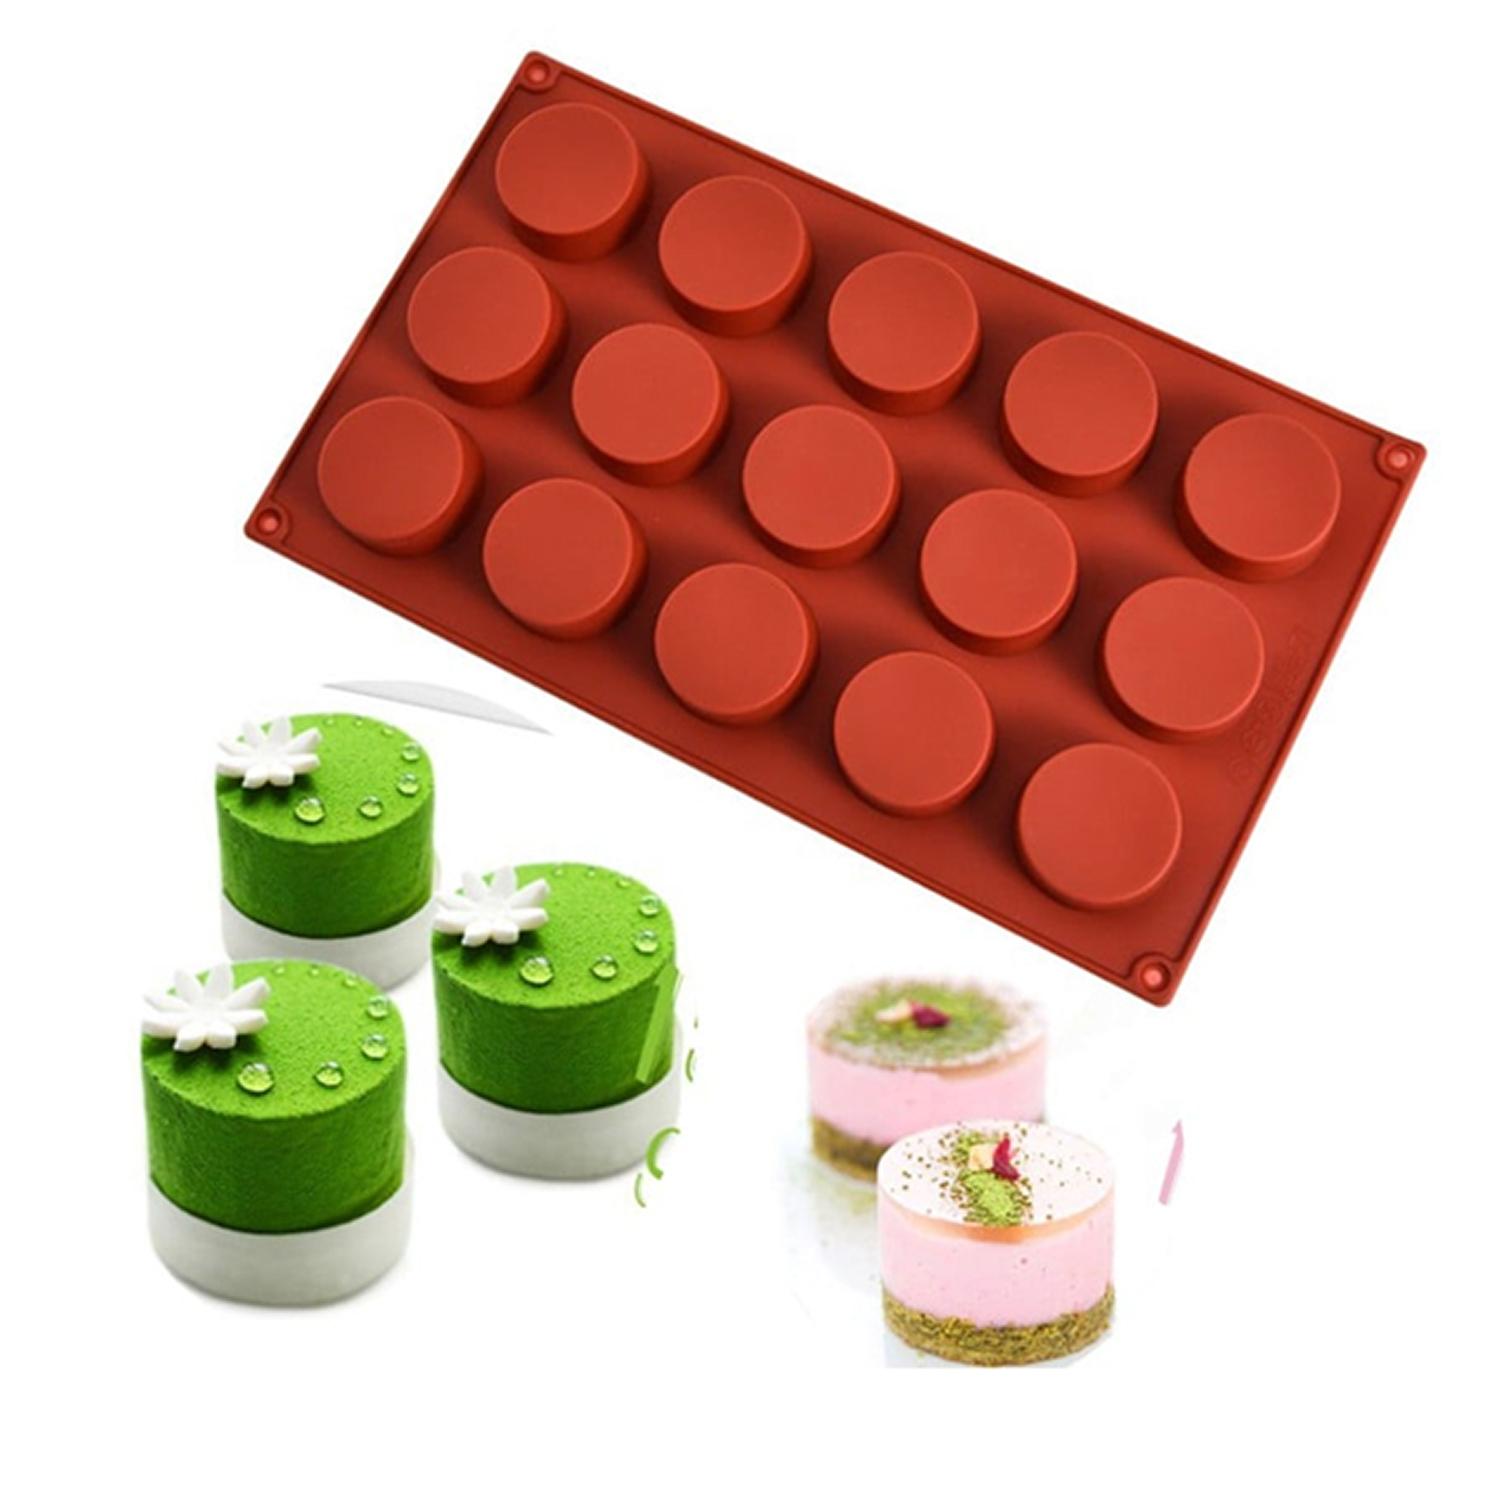 SCM0033 12 HOLE CYLINDER CHOCOLATE SILICON MOLD